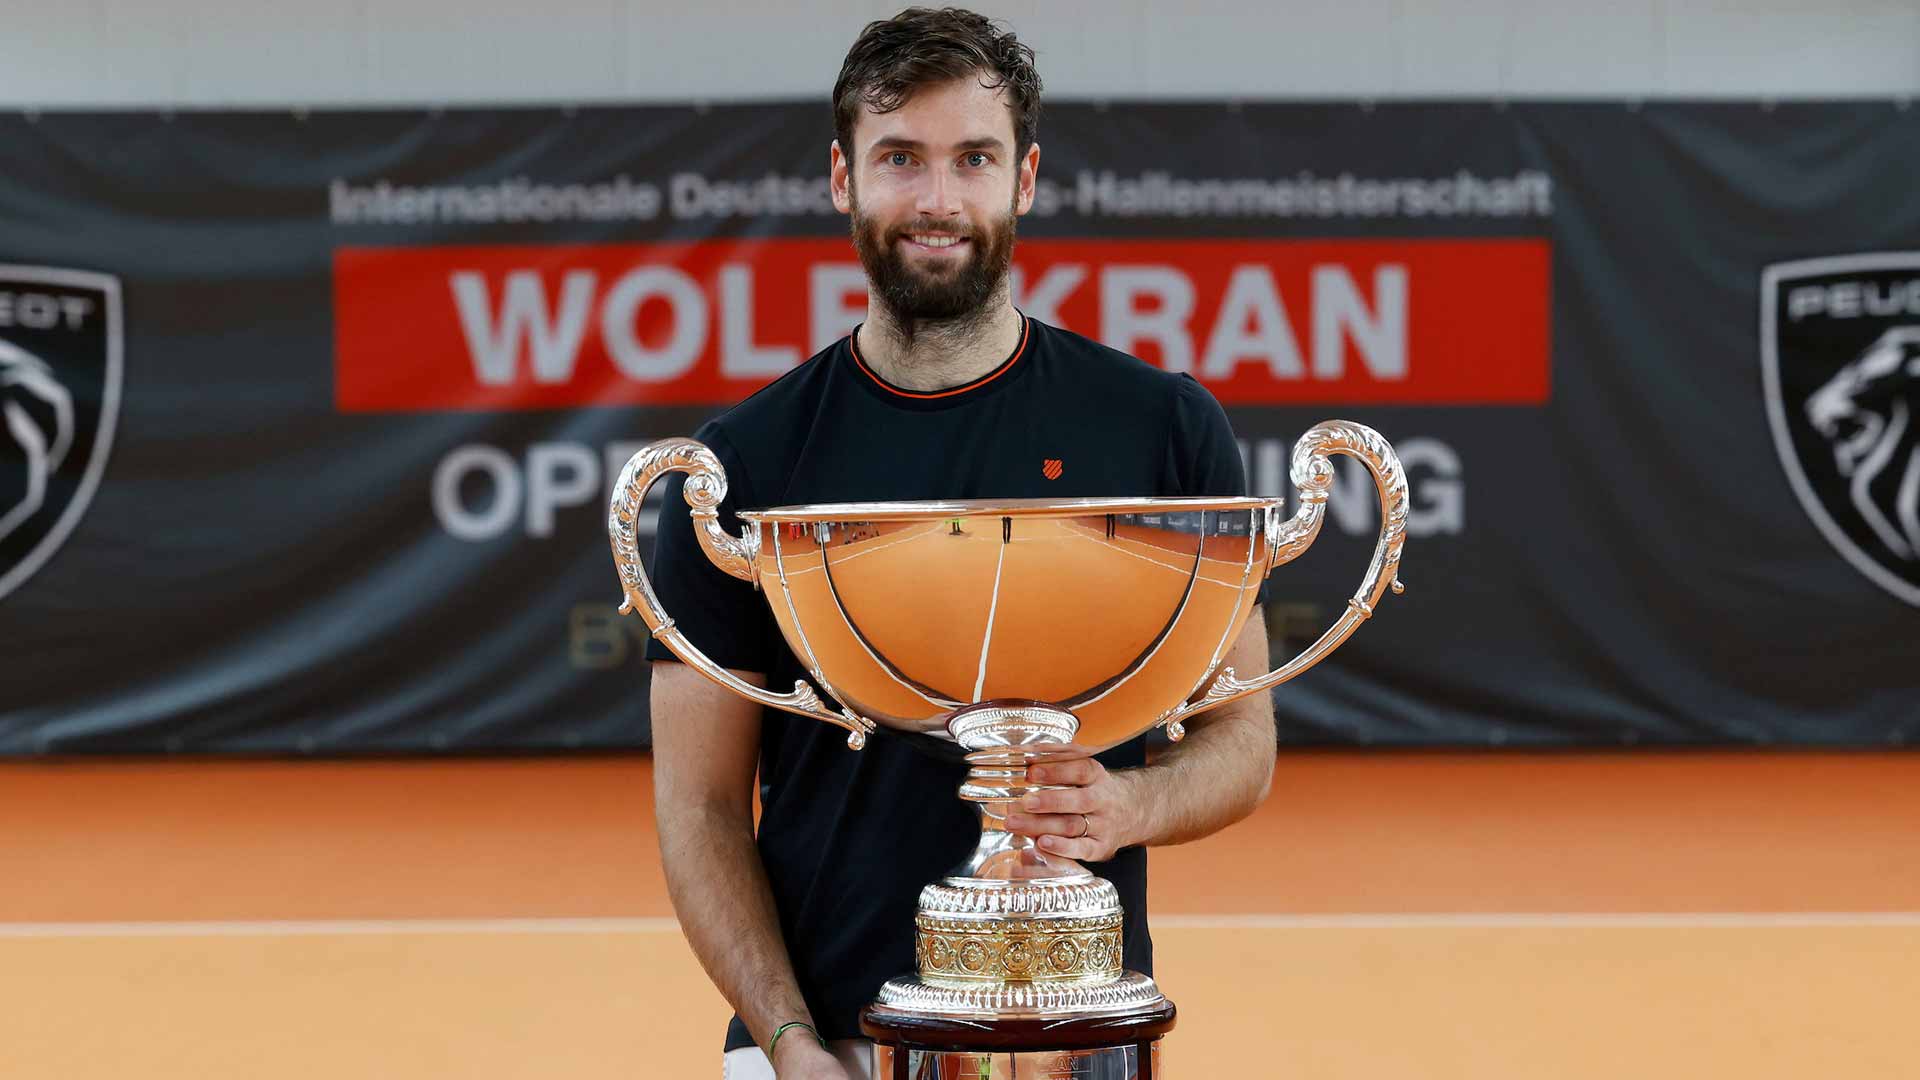 Frenchman <a href='https://www.atptour.com/en/players/quentin-halys/hb64/overview'>Quentin Halys</a> lifts the trophy at the Ismaning Challenger.